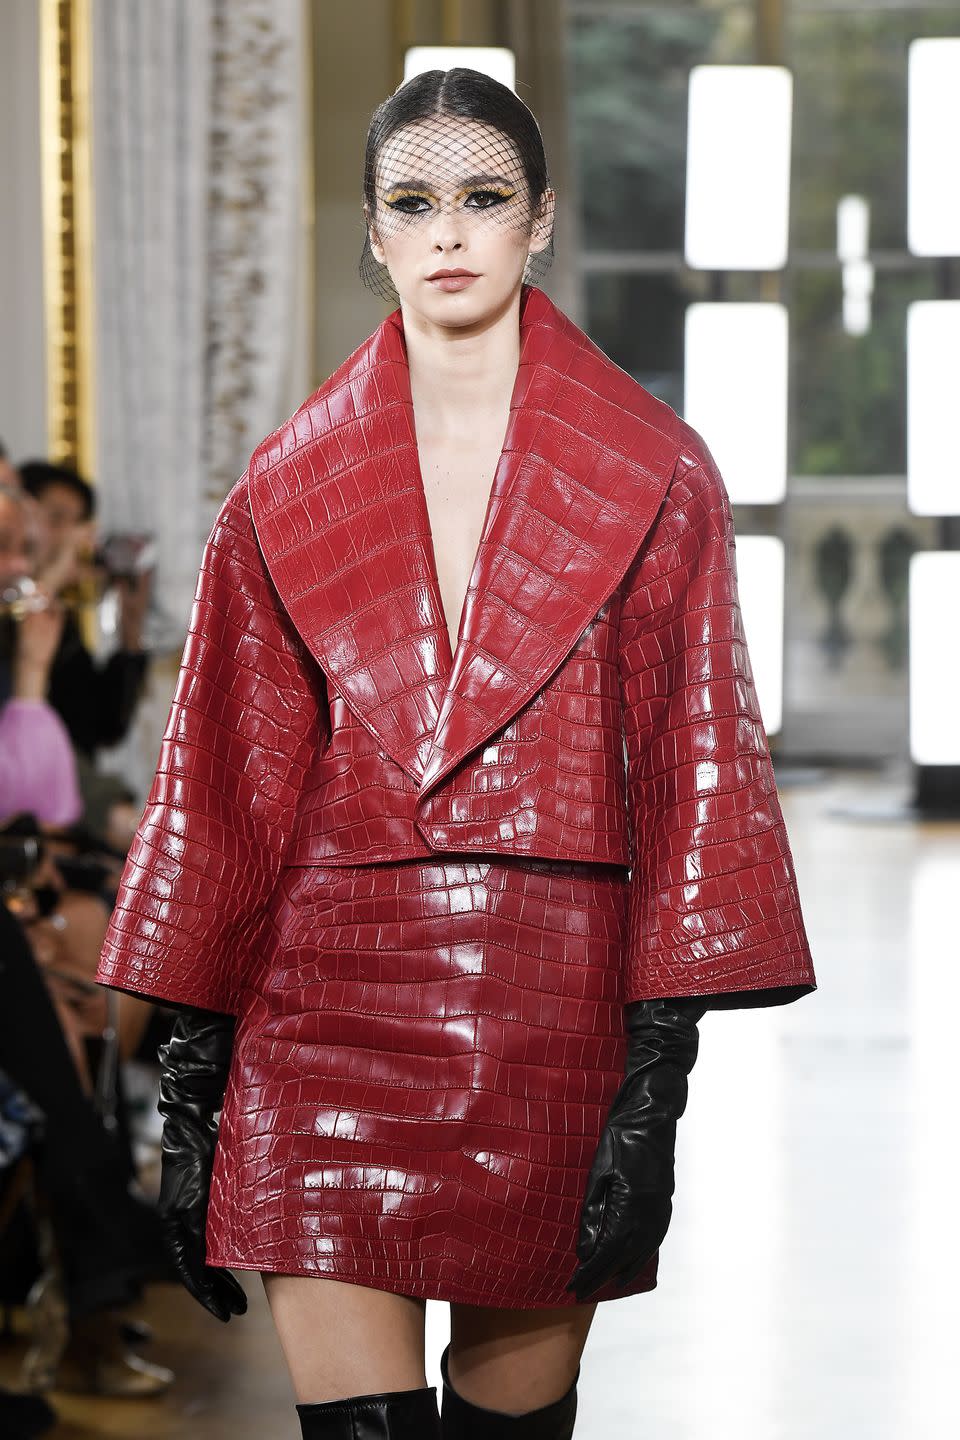 2) Cropped red leather jacket with shawl collar, and skirt